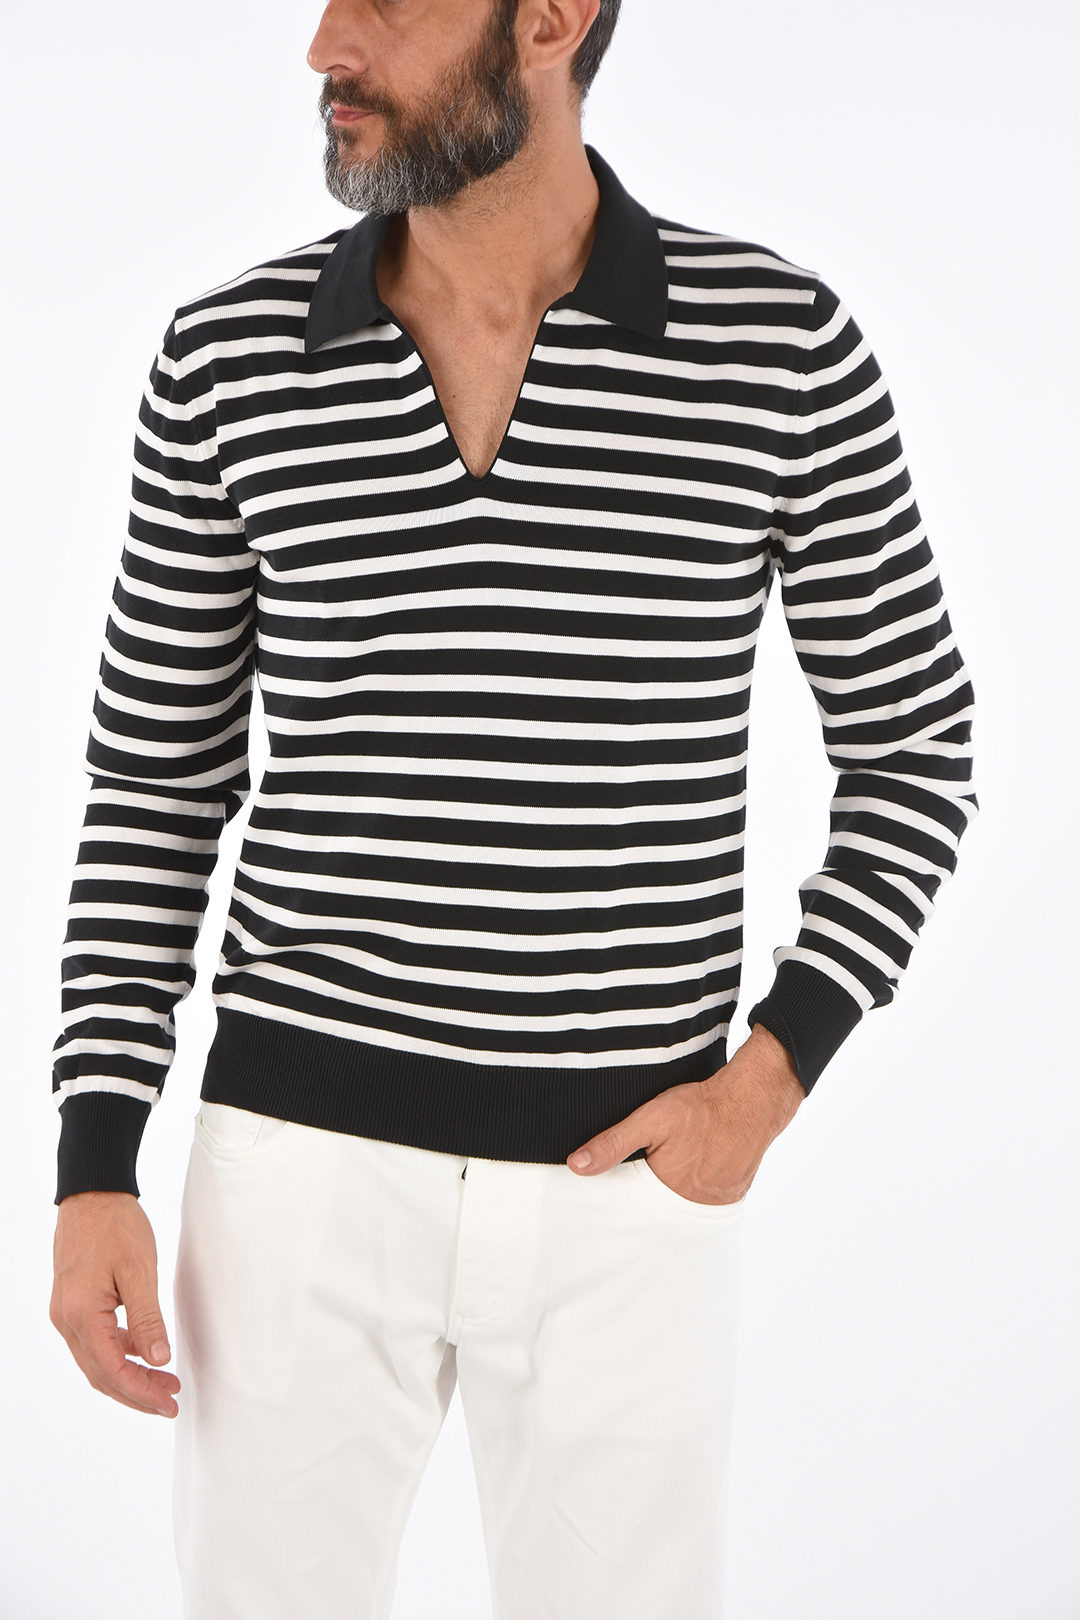 Dolce & Gabbana striped polo shirt without button men - Glamood Outlet